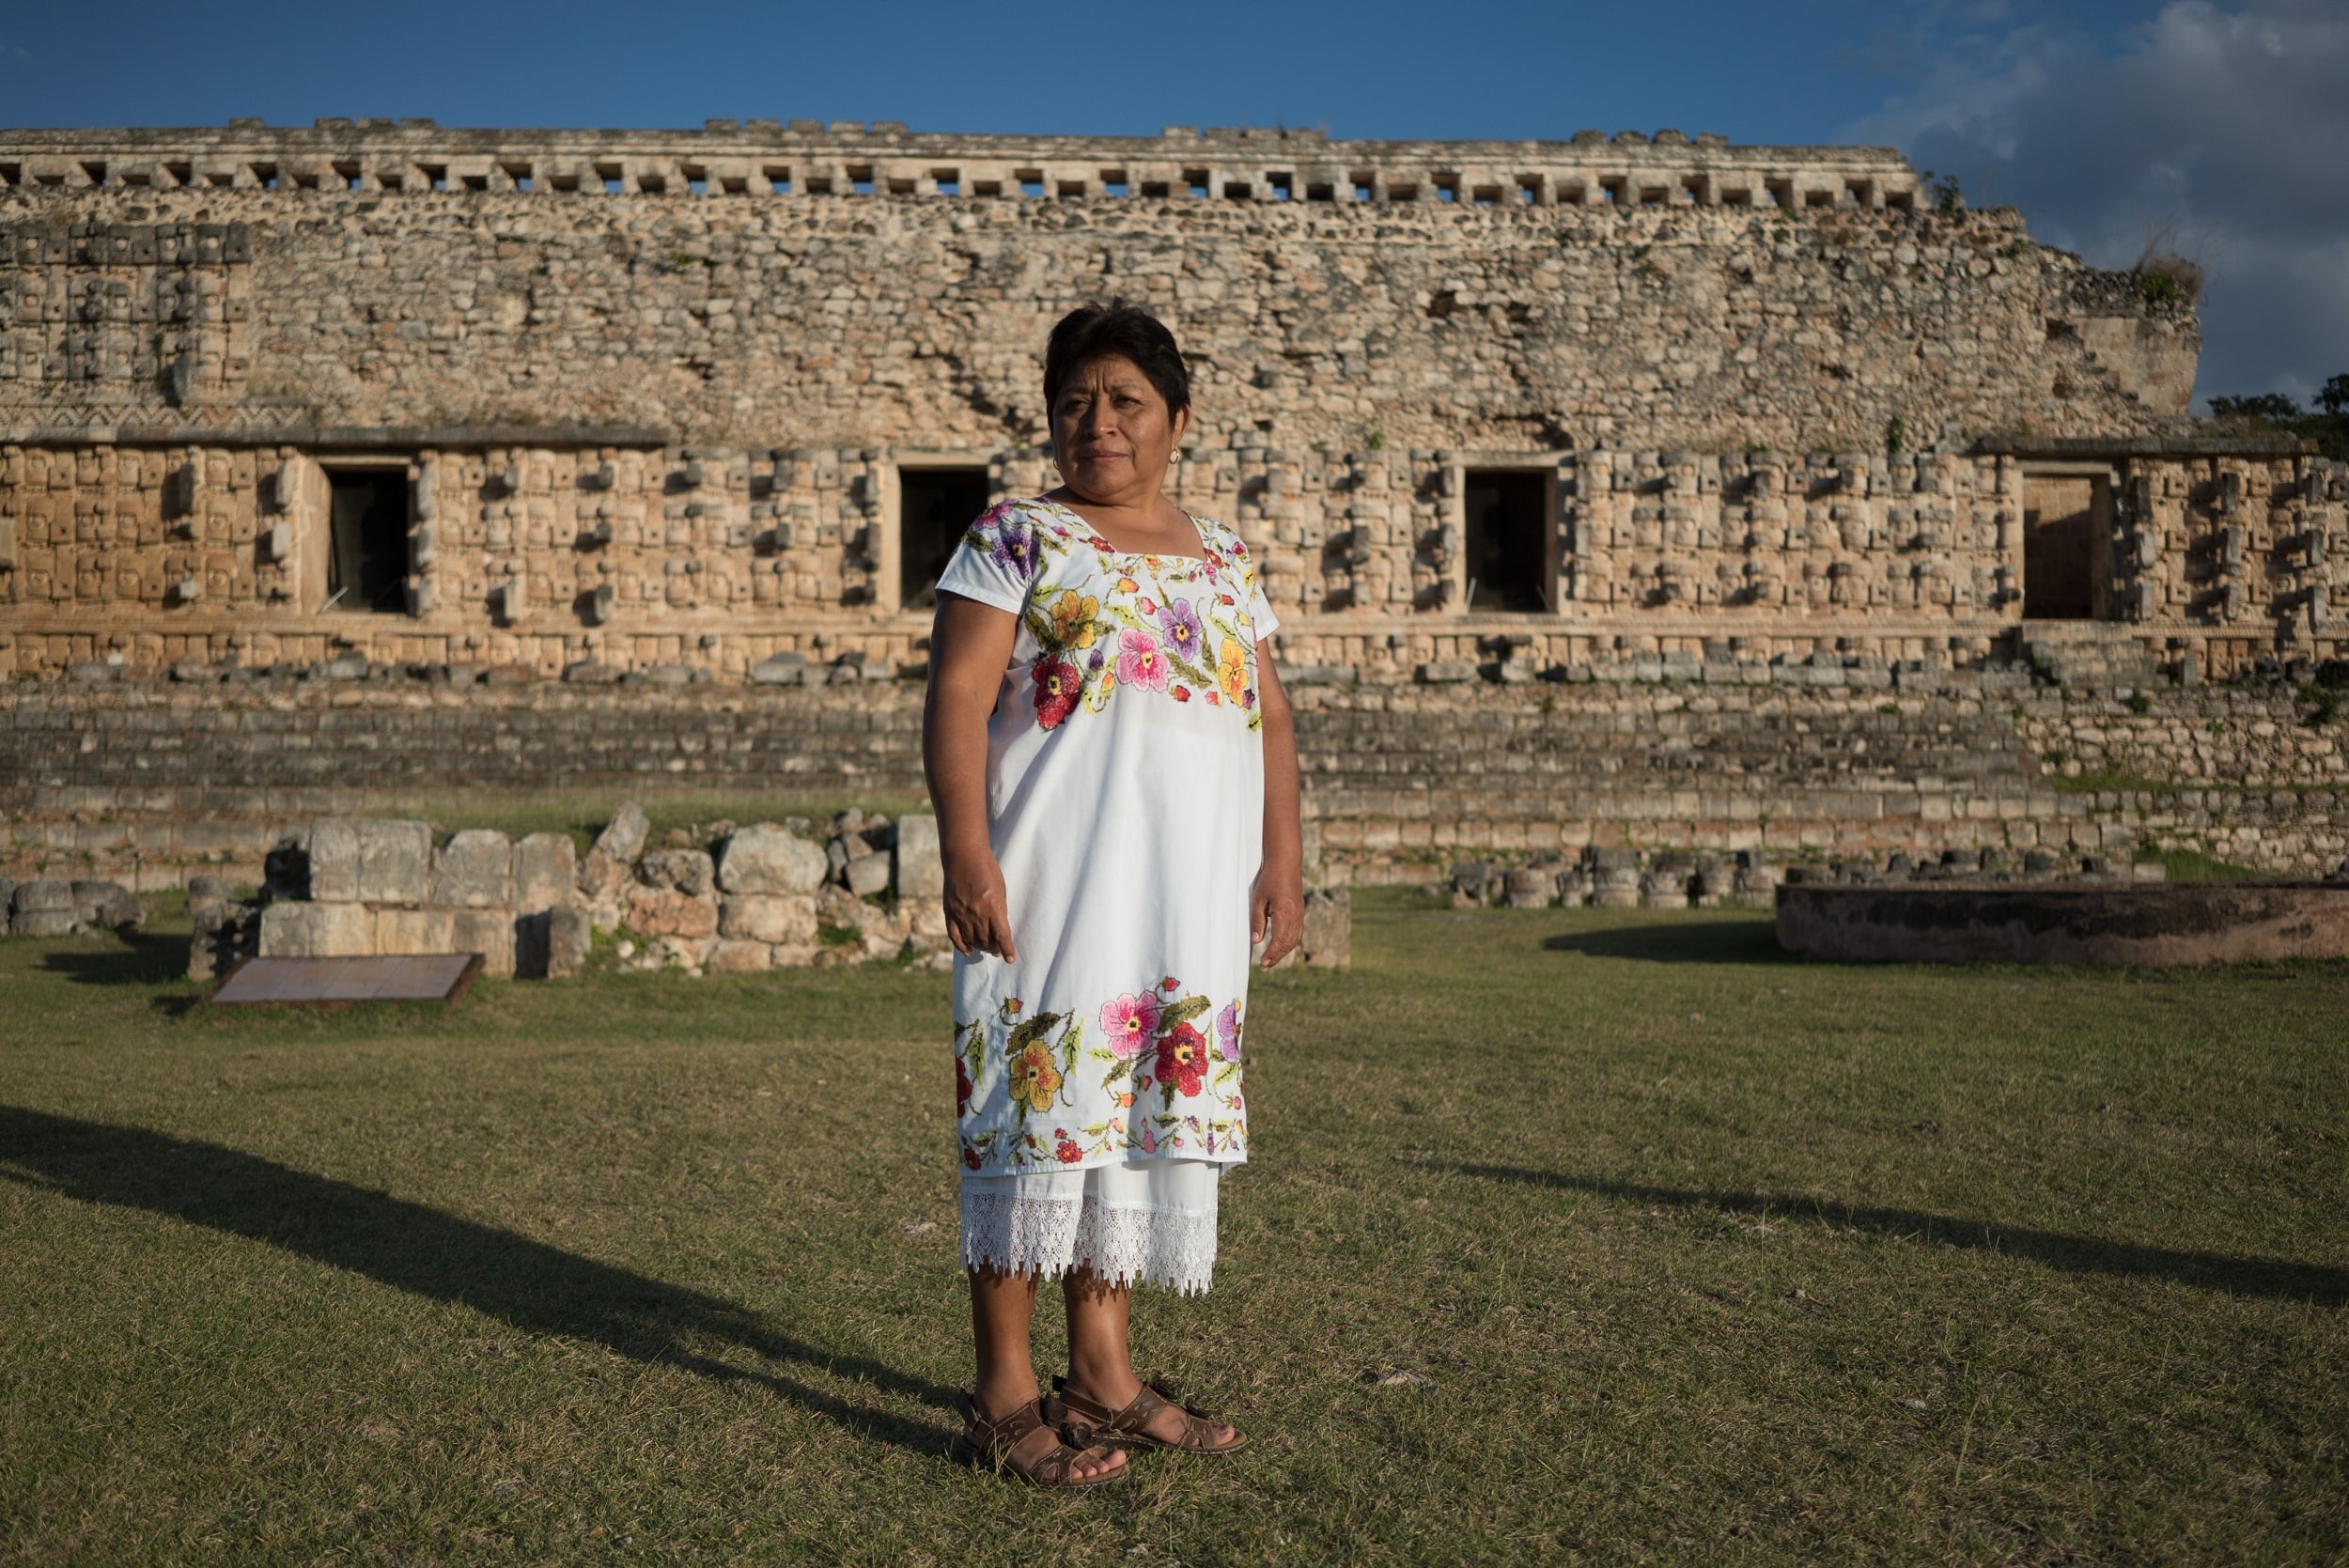 A Mayan Lady of Honey. Leydy Pech, 55, is a proud Mayan woman who makes her living as a beekeeper in a collective of Mayan women. She was born and raised in Hopelchén, where the practice of beekeeping goes back centuries for the Mayan community.